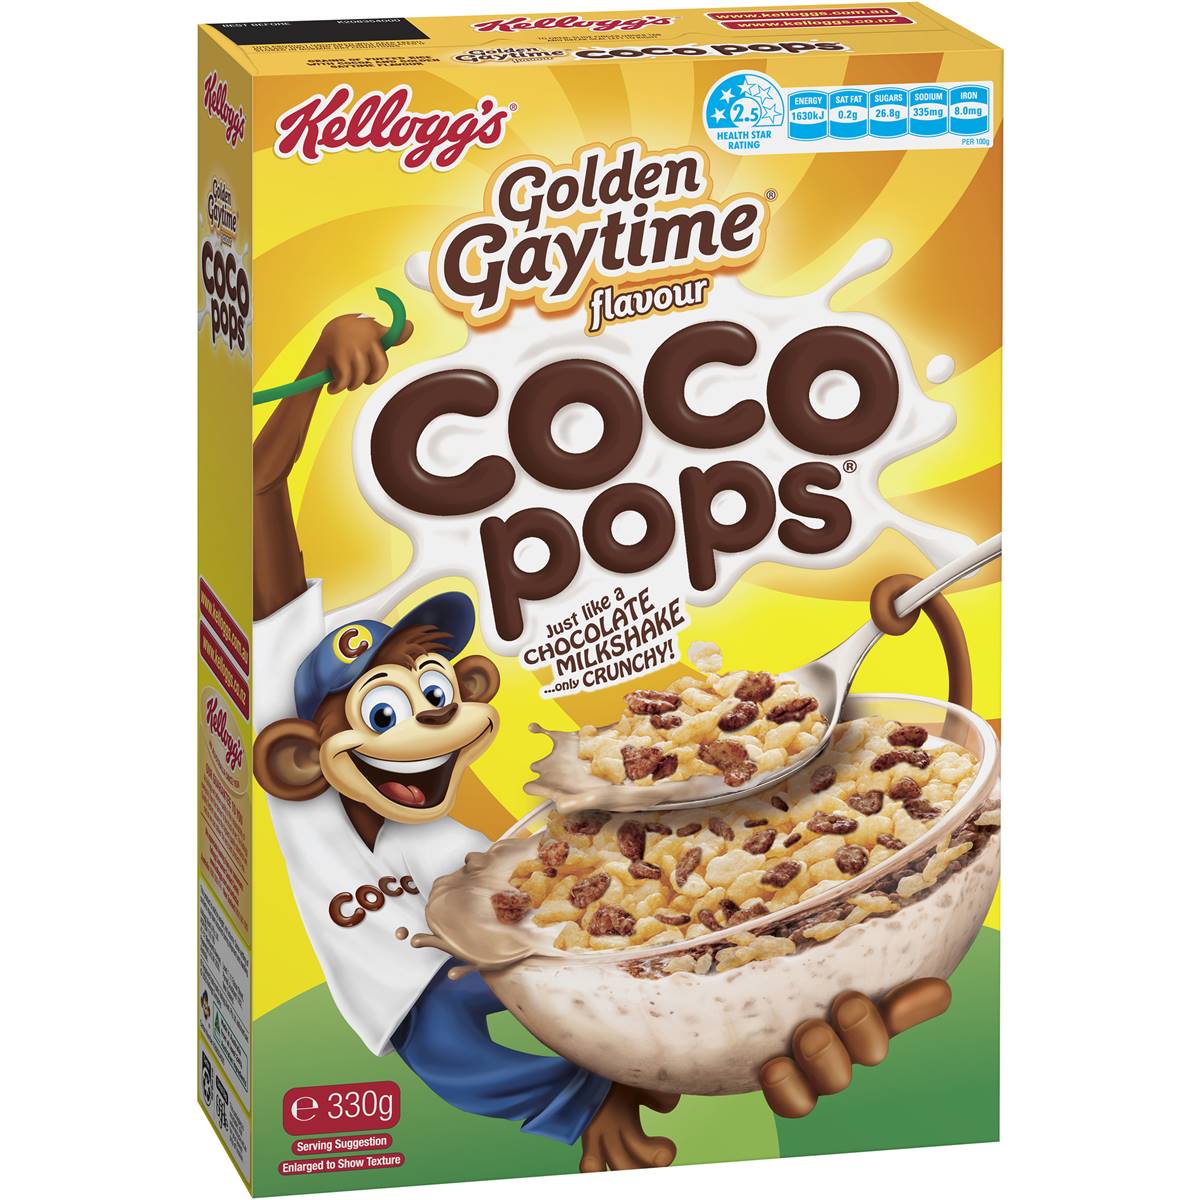 Calories in Kellogg's Coco Pops Golden Gaytime Flavour